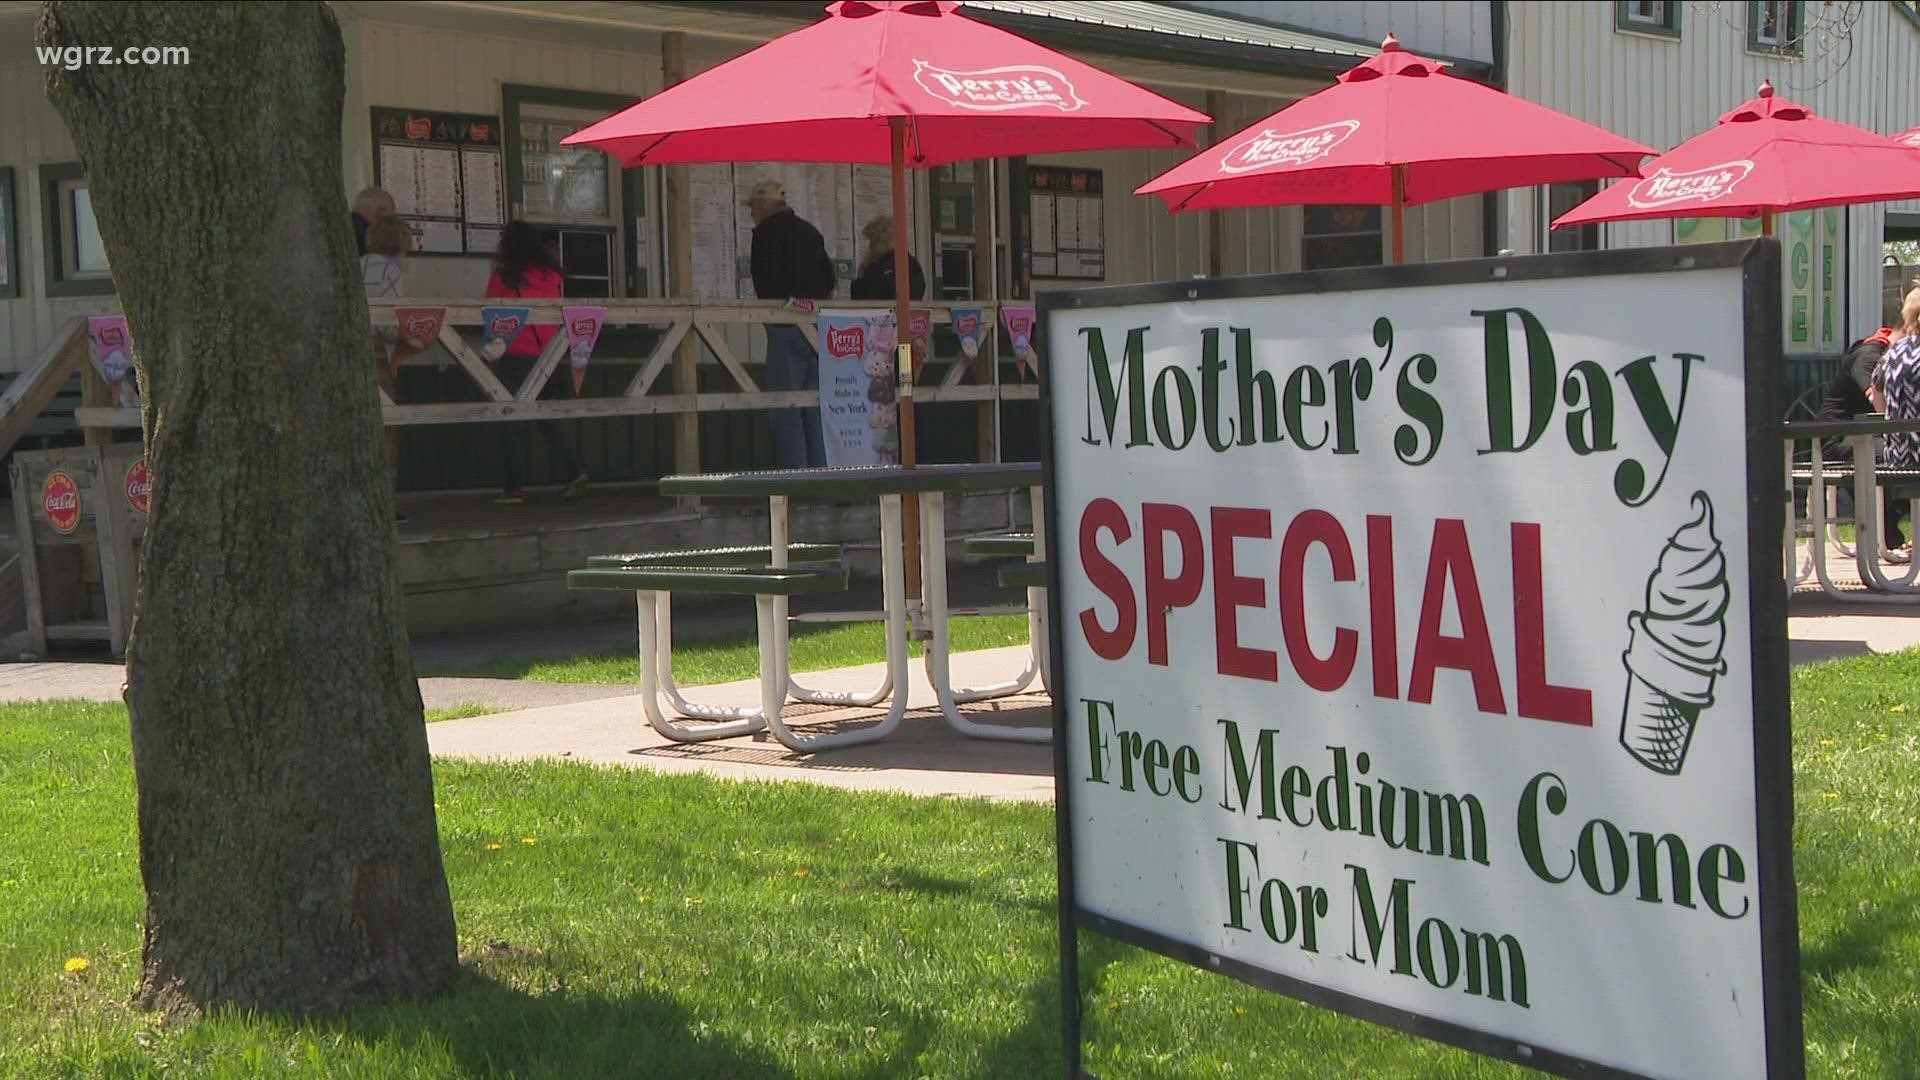 Green Acres Ice Cream is celebrating Mother's Day this Sunday by giving out free ice cream to all the moms out there. There was no purchase necessary!